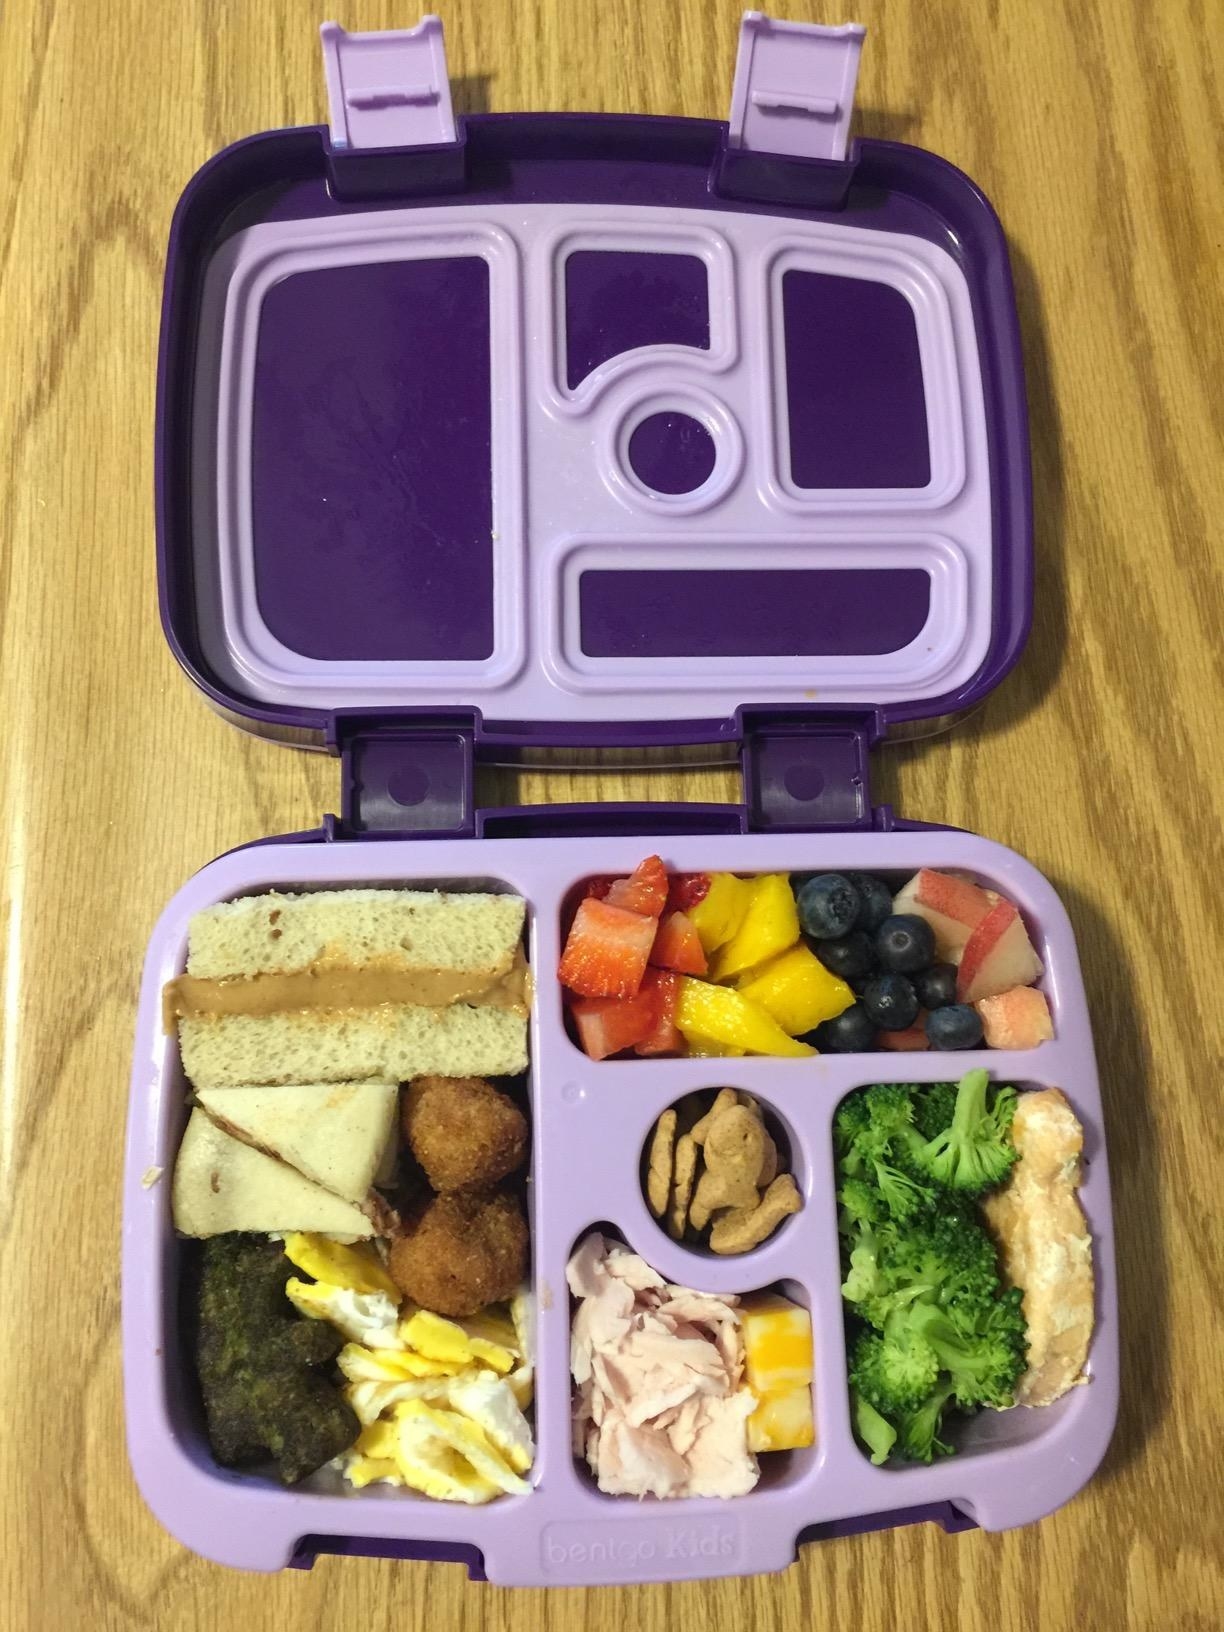 reviewer&#x27;s photo showing the purple bento box open and packed for their kid with peanut butter sandwich, egg, turkey and cheese, broccoli and chicken, fruit, and graham crackers among the various compartments